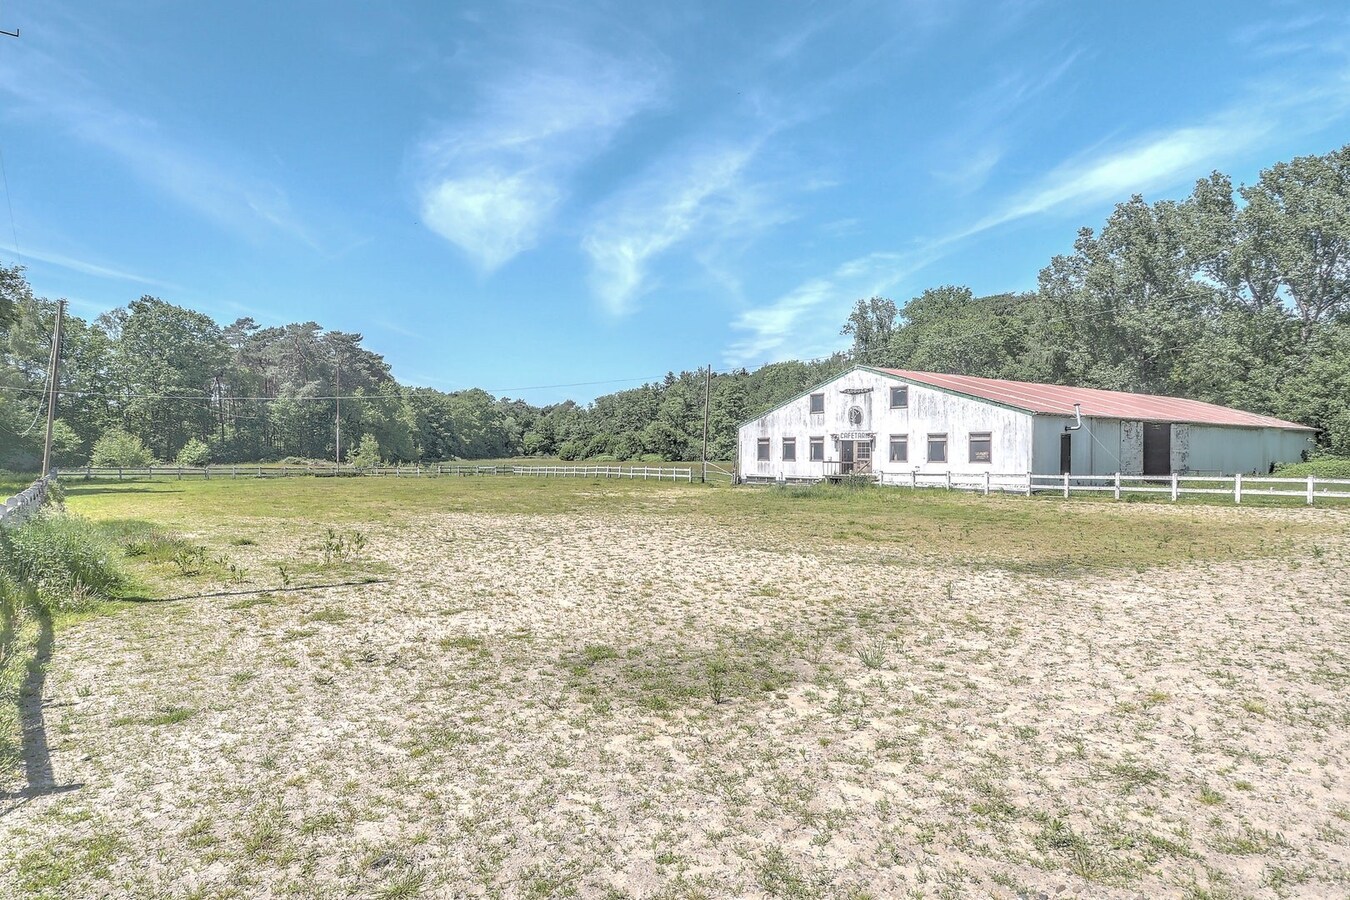 Equestrian center with great potential (and subsidies) on approximately 5.67 hectares in Heusden-Zolder. 